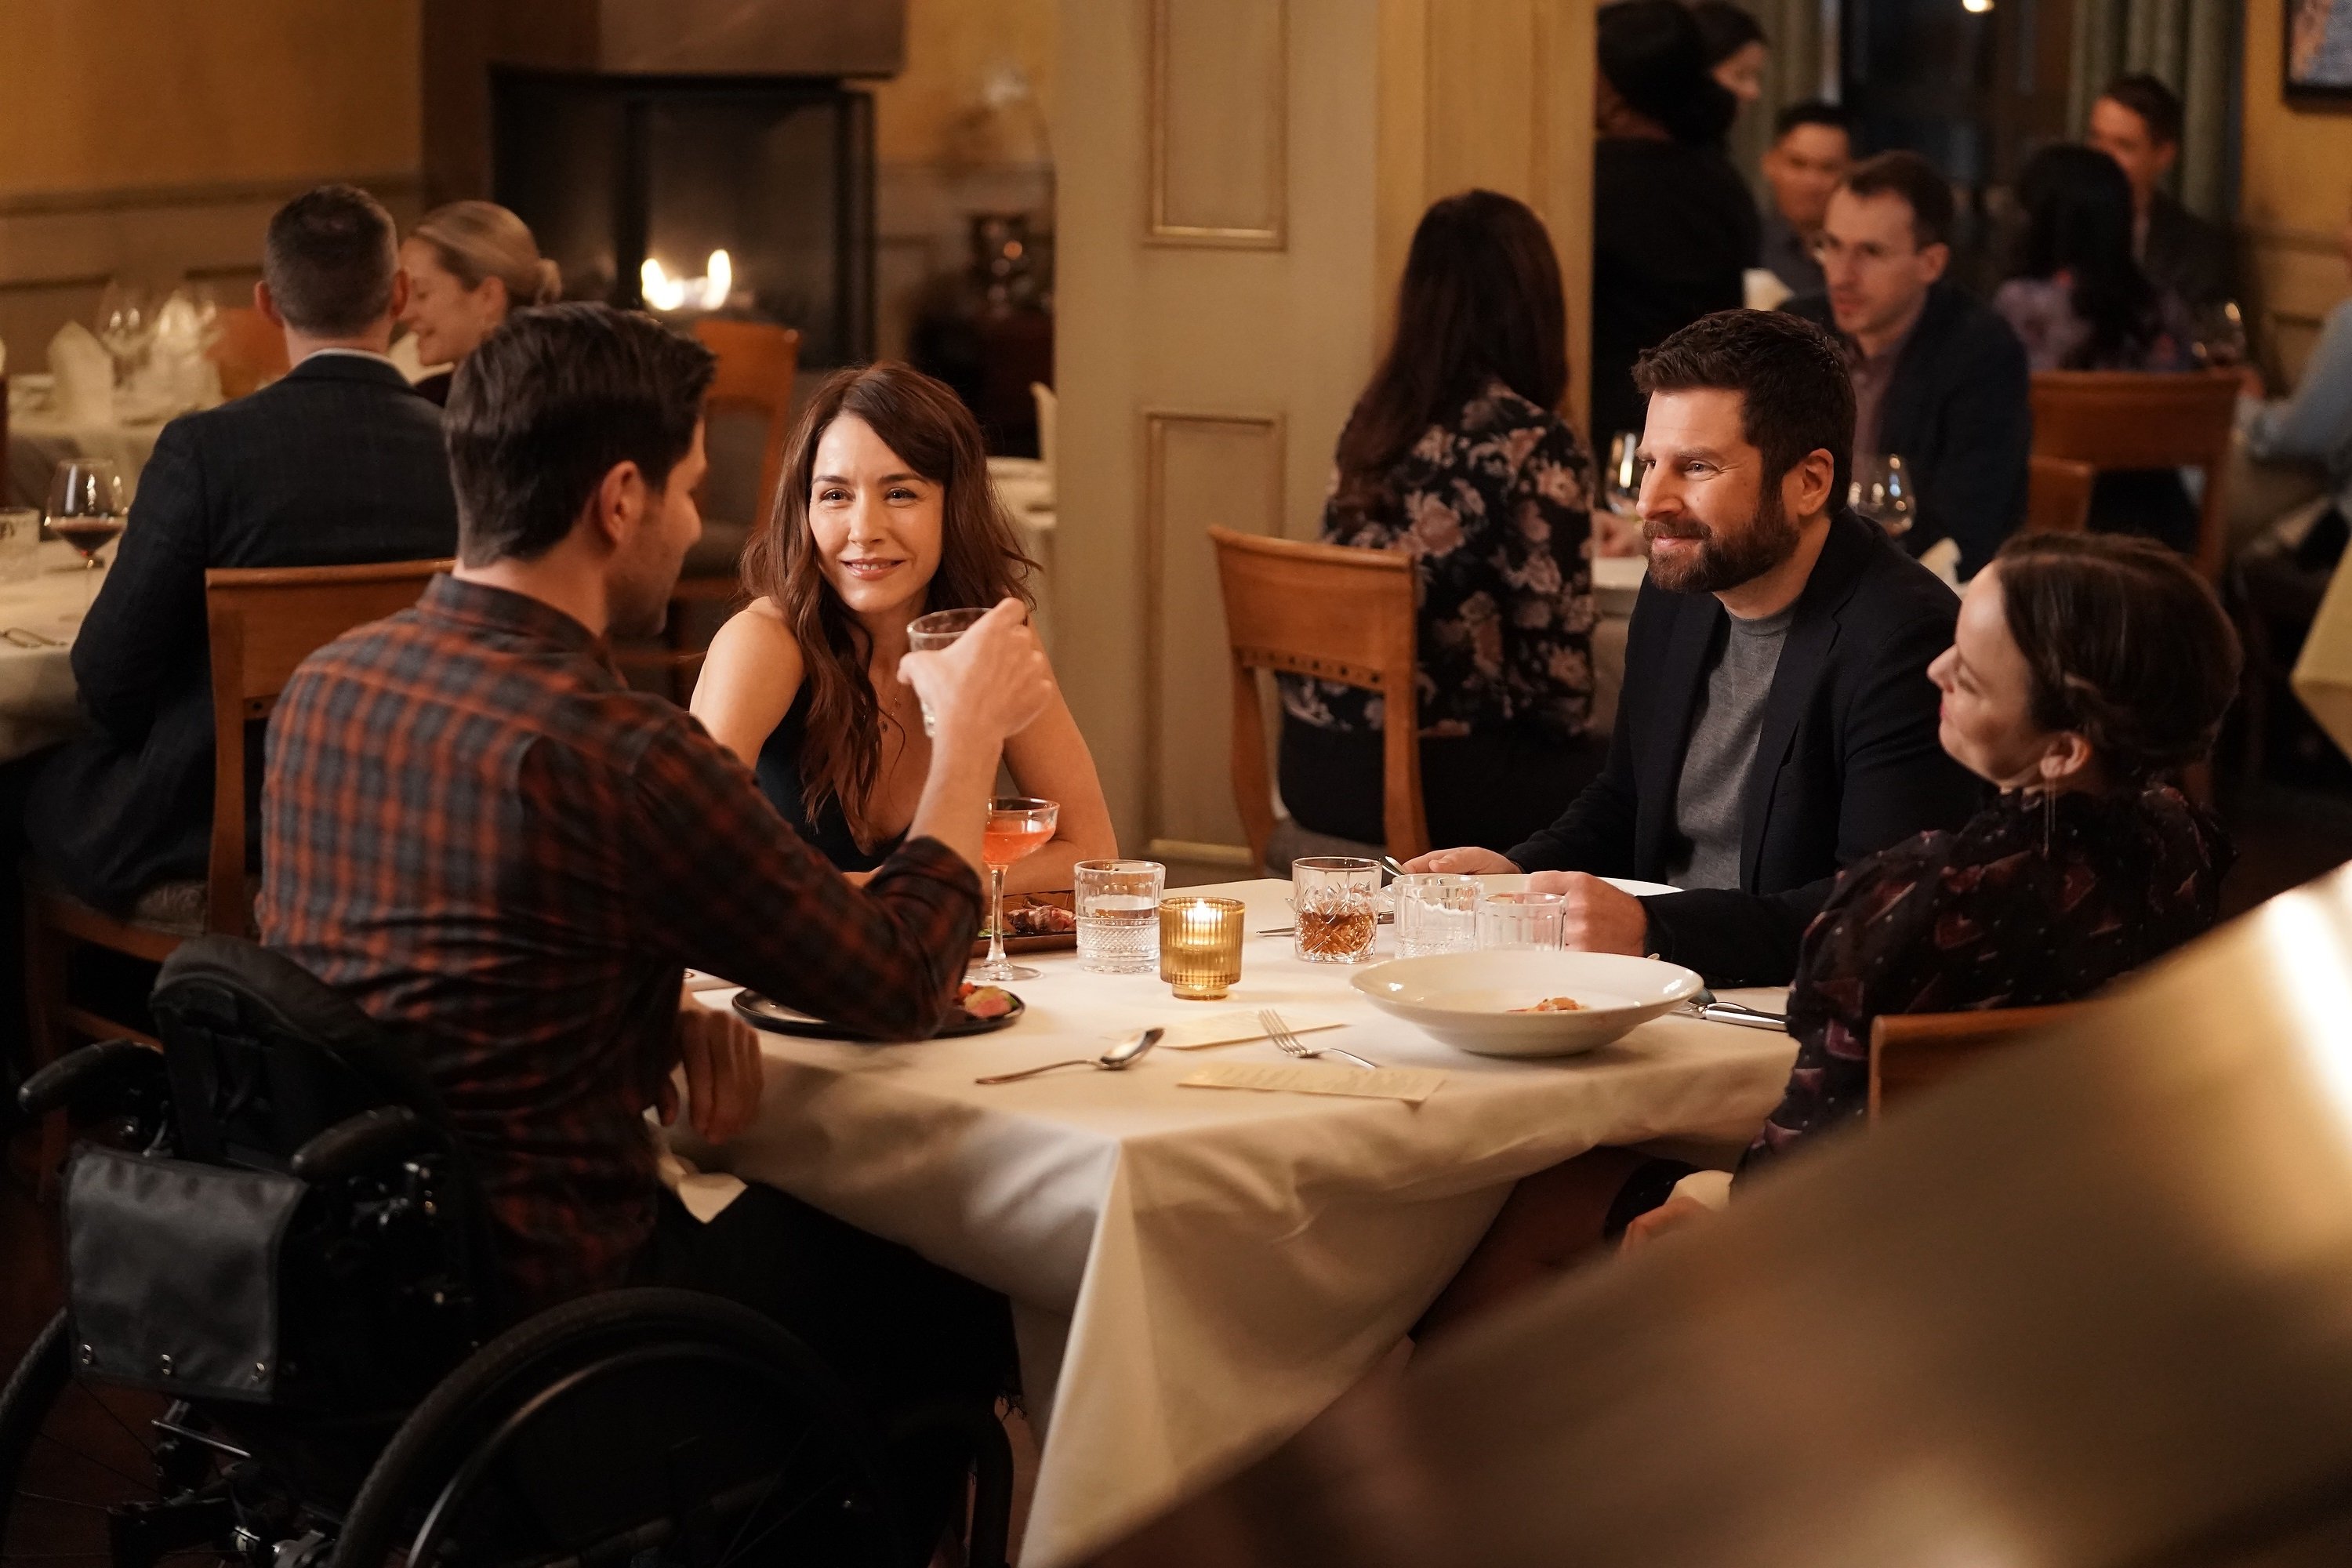 A Million Little Things Cast members Erin Karpluk, James Roday Rodriguez, Allison Miller and David Giuntoli sit around a table with their glasses raised for a toast